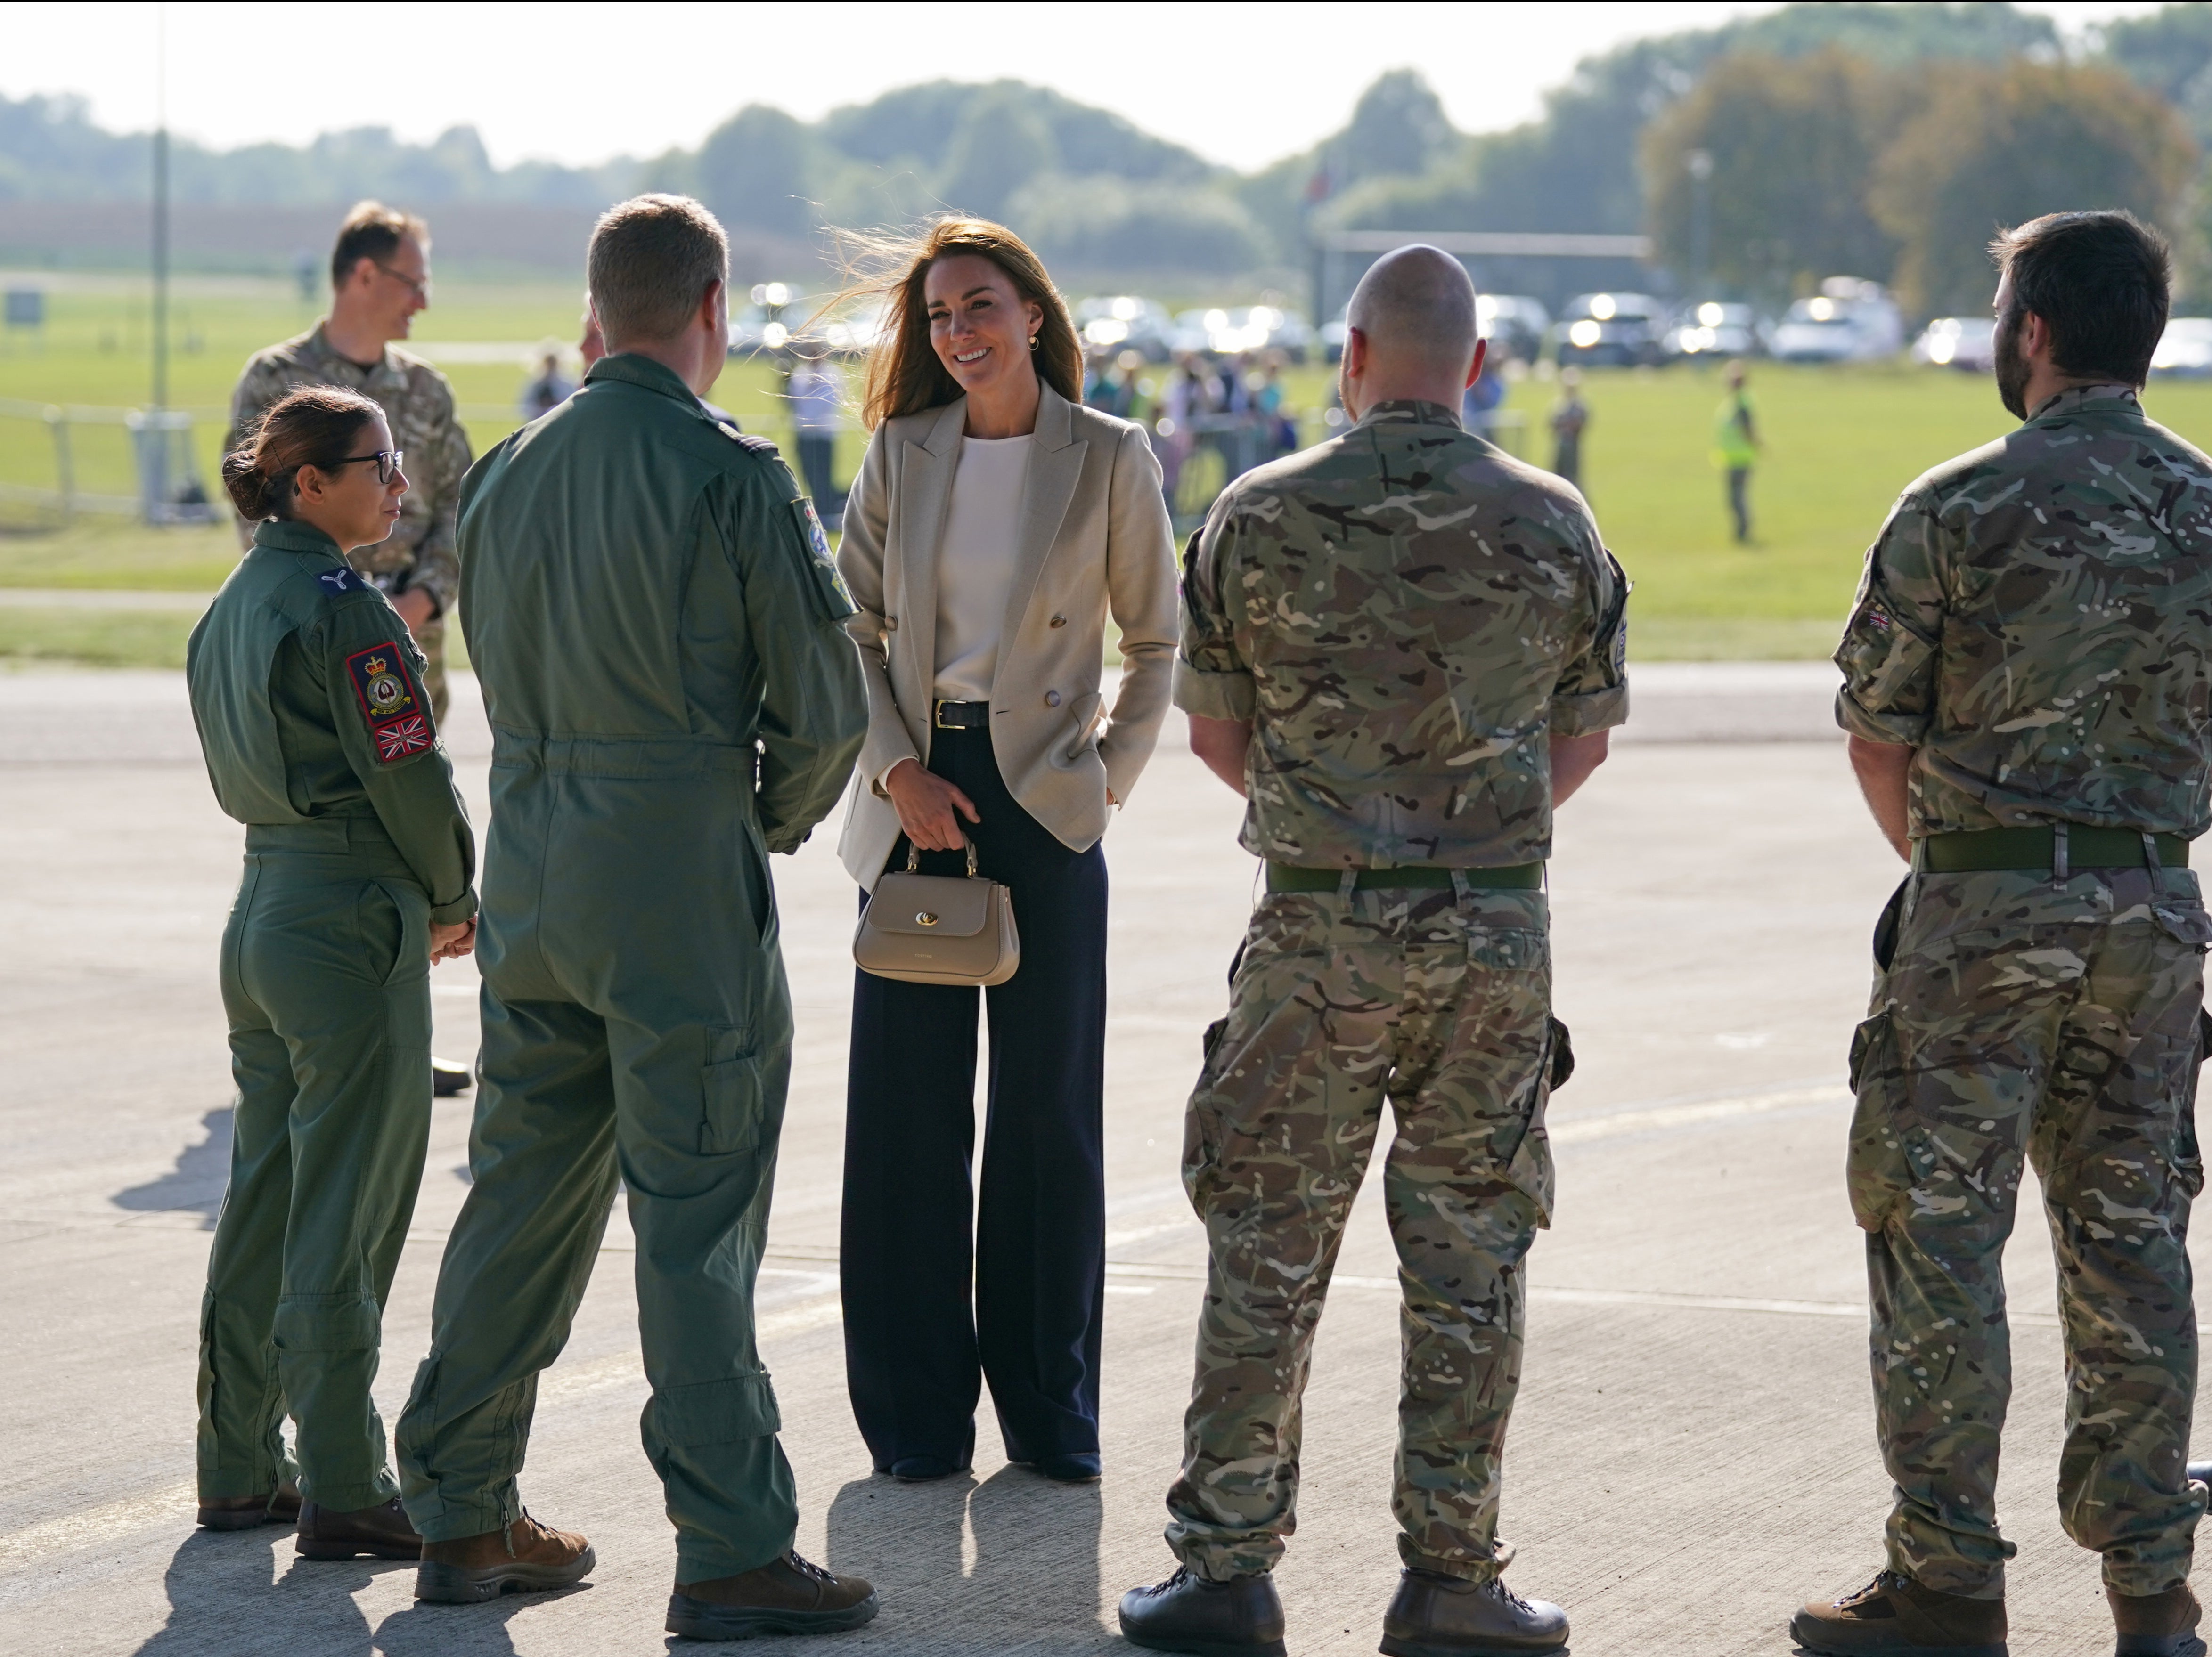 The Duchess of Cambridge during a visit to RAF Brize Norton, near Oxford, to meet military personnel and civilians who helped evacuate Afghans from their country